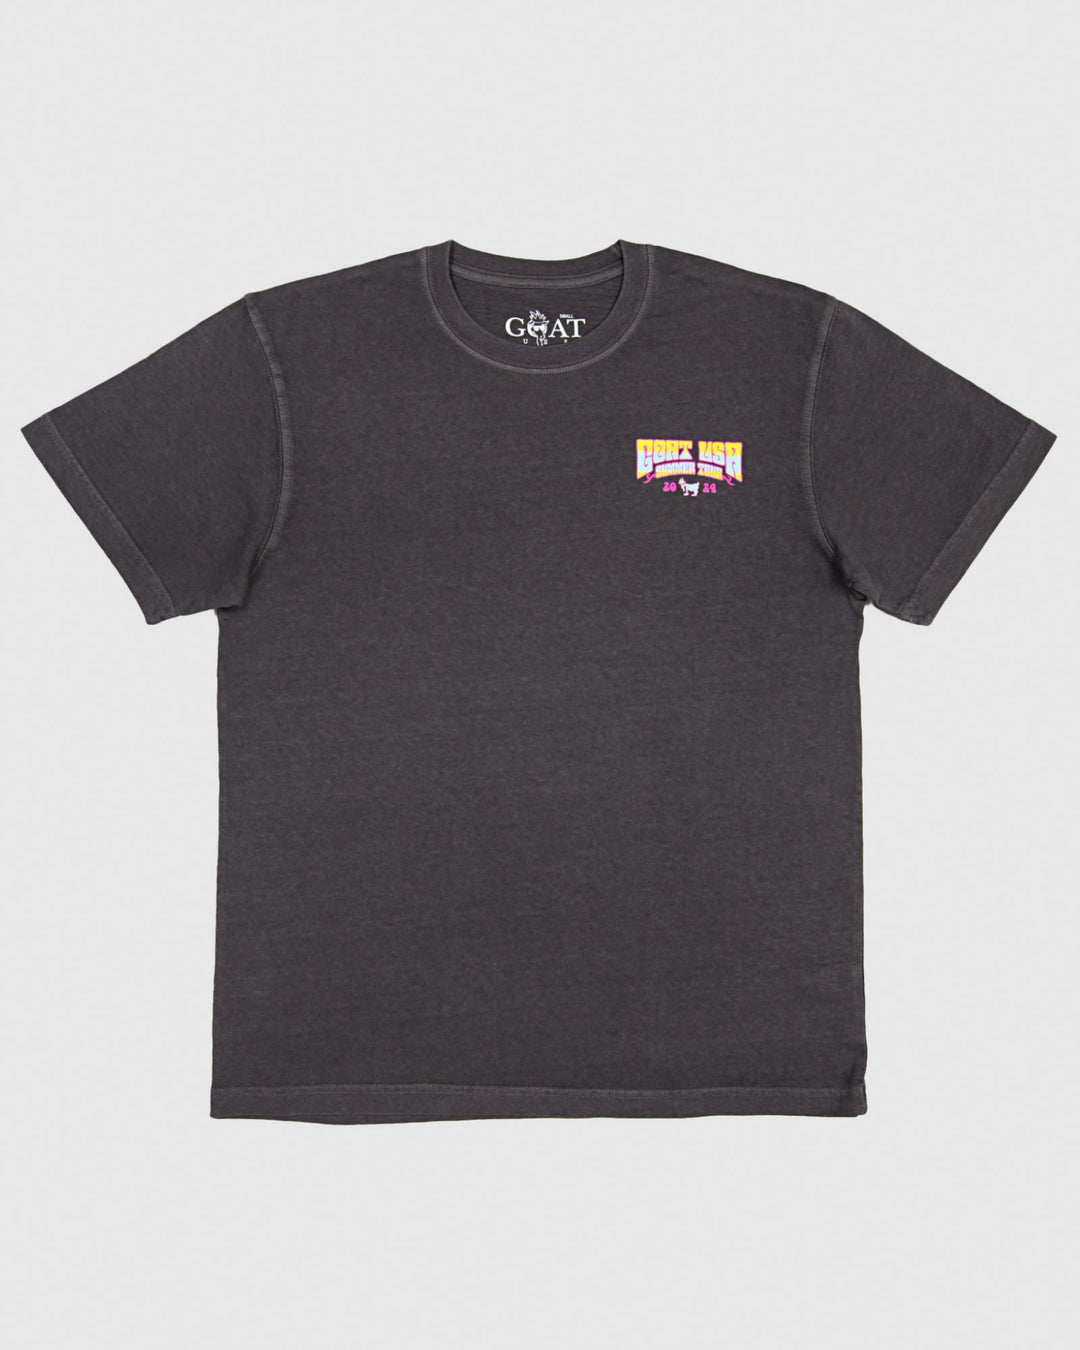 Front of pepper-colored t-shirt